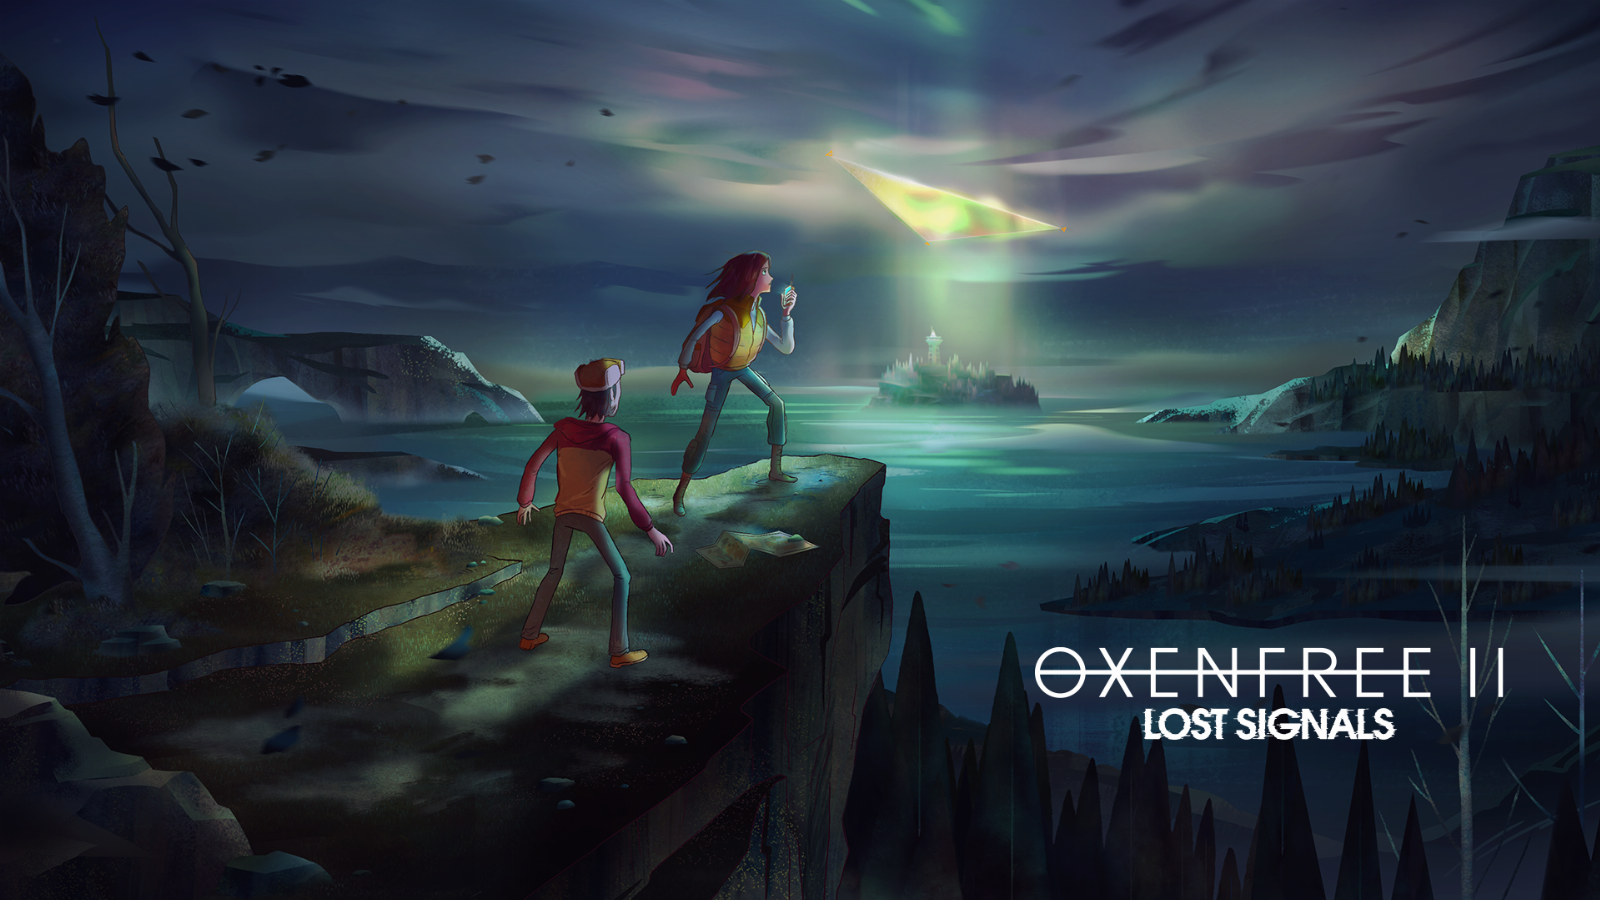 Oxenfree II: Lost Signals will launch on Netflix and other platforms on July 12